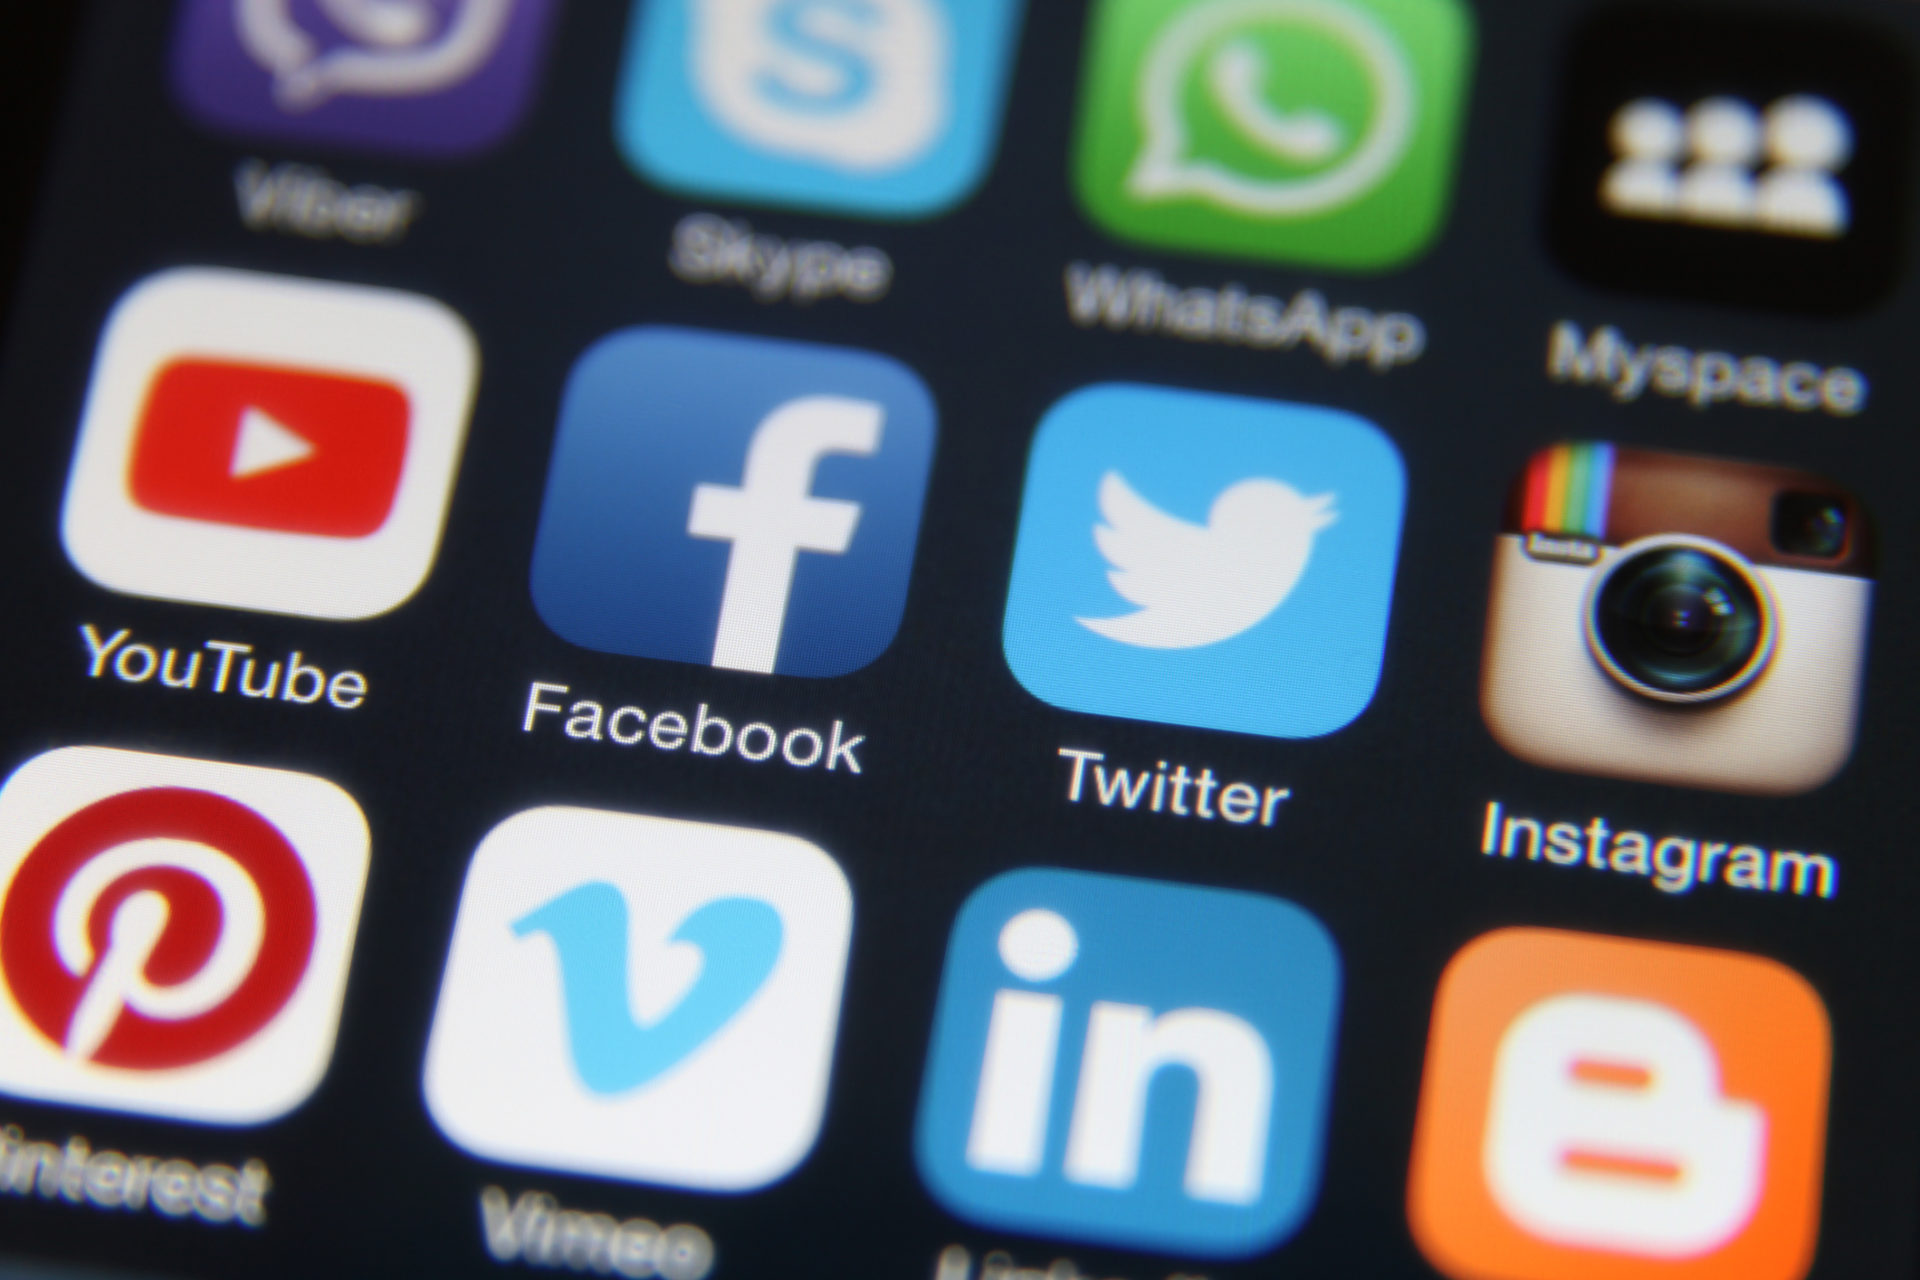 How to decide which social media platforms are best for your business